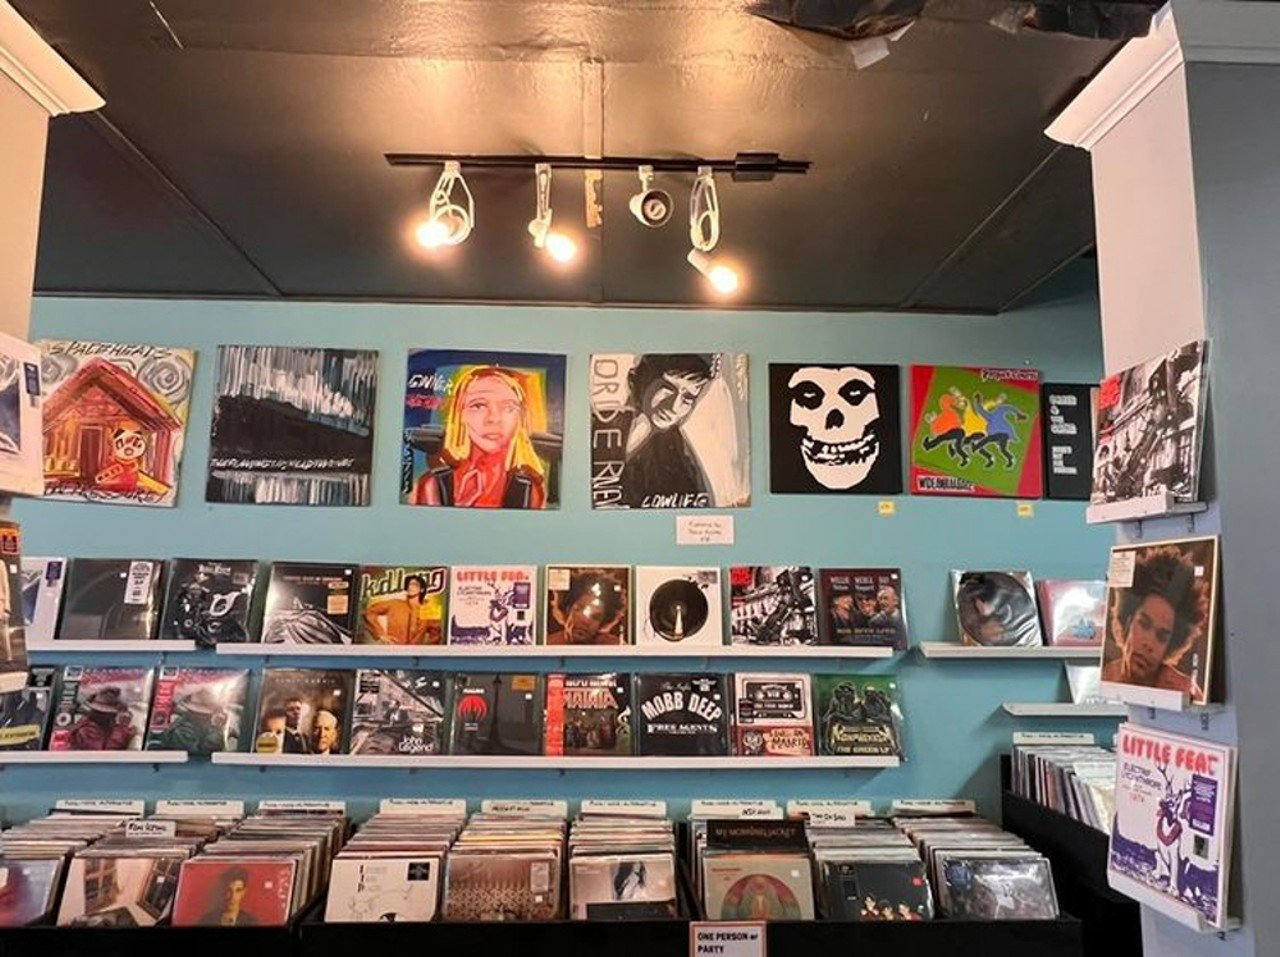 Go to a record store 
Finding new music is fun, especially when you can find what you actually like and don&#146;t have to try to impress anyone. There&#146;s no such thing as a &#147;guilty pleasure&#148; artist when you&#146;re by yourself.
Photo via guestroomrecordslouisville/Instagram